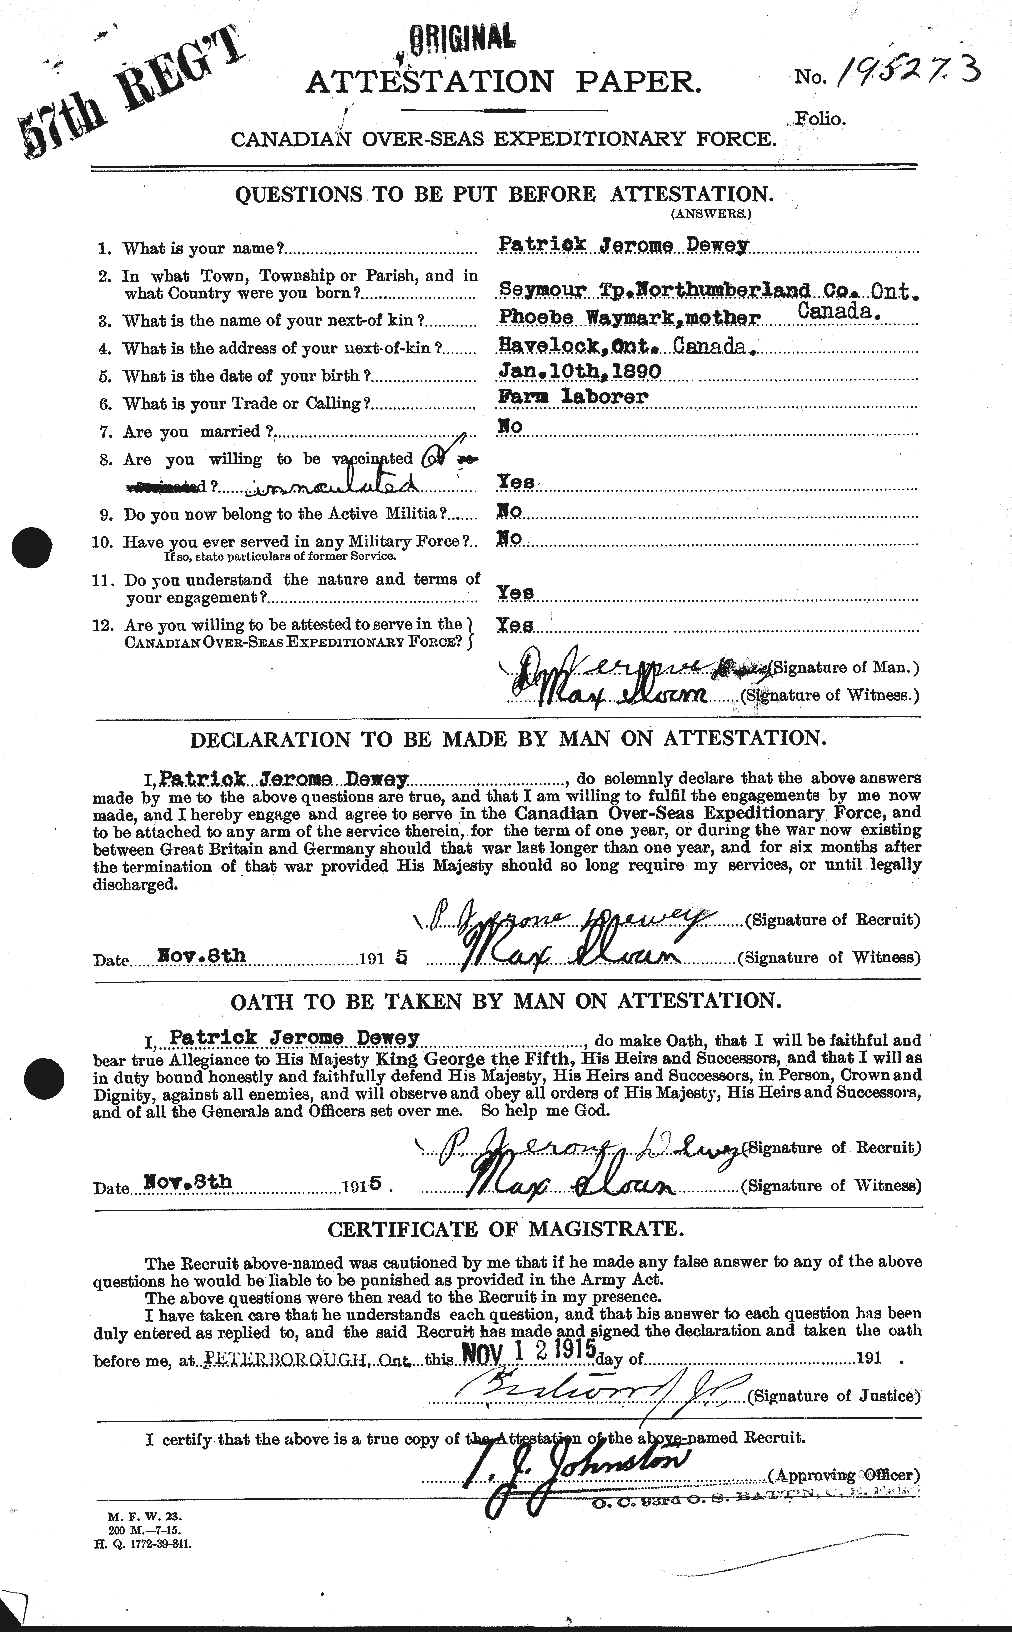 Personnel Records of the First World War - CEF 288746a